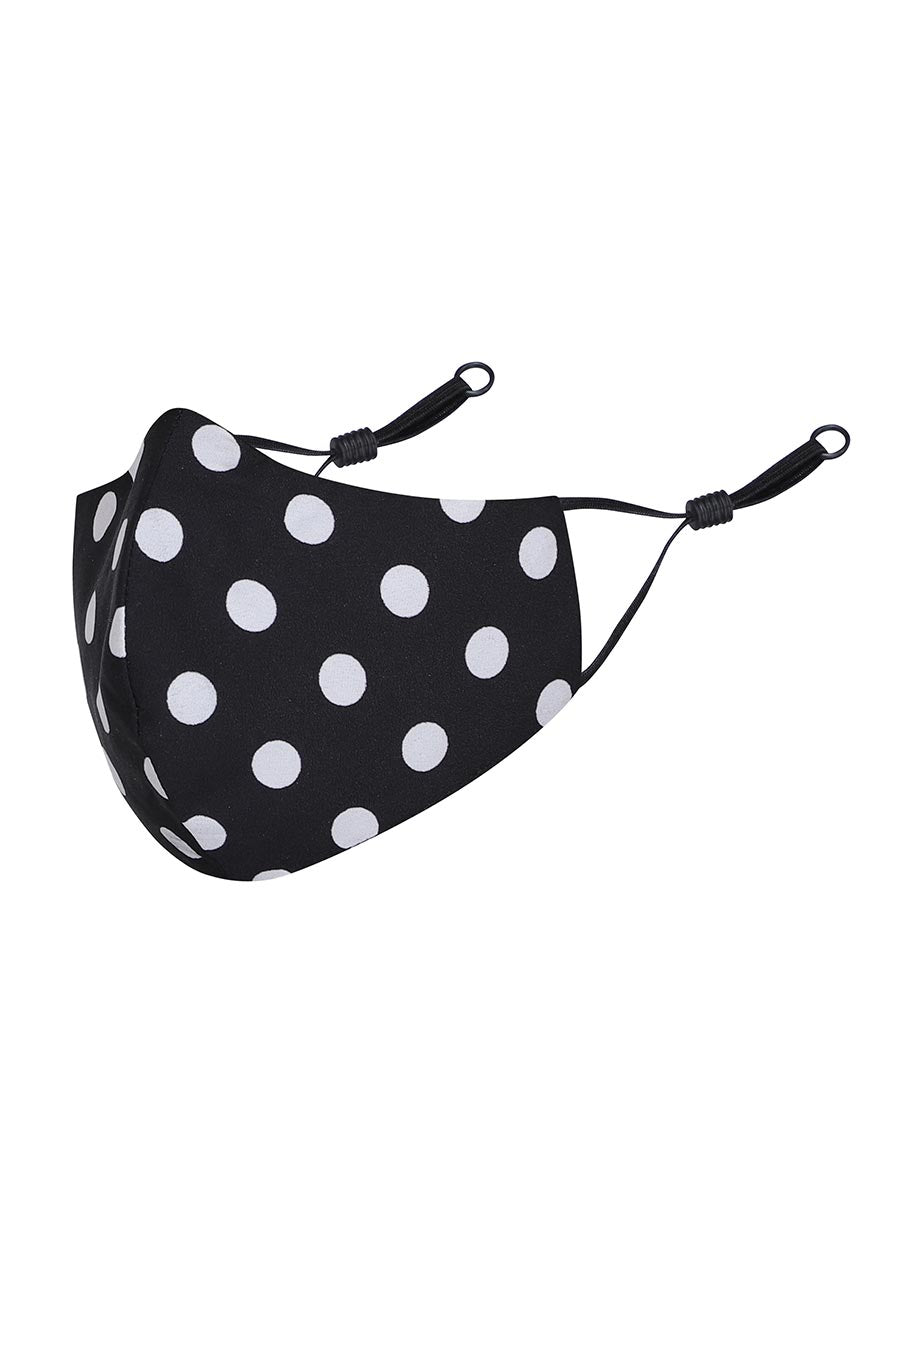 Black 3 Ply Mask With Polka Dots